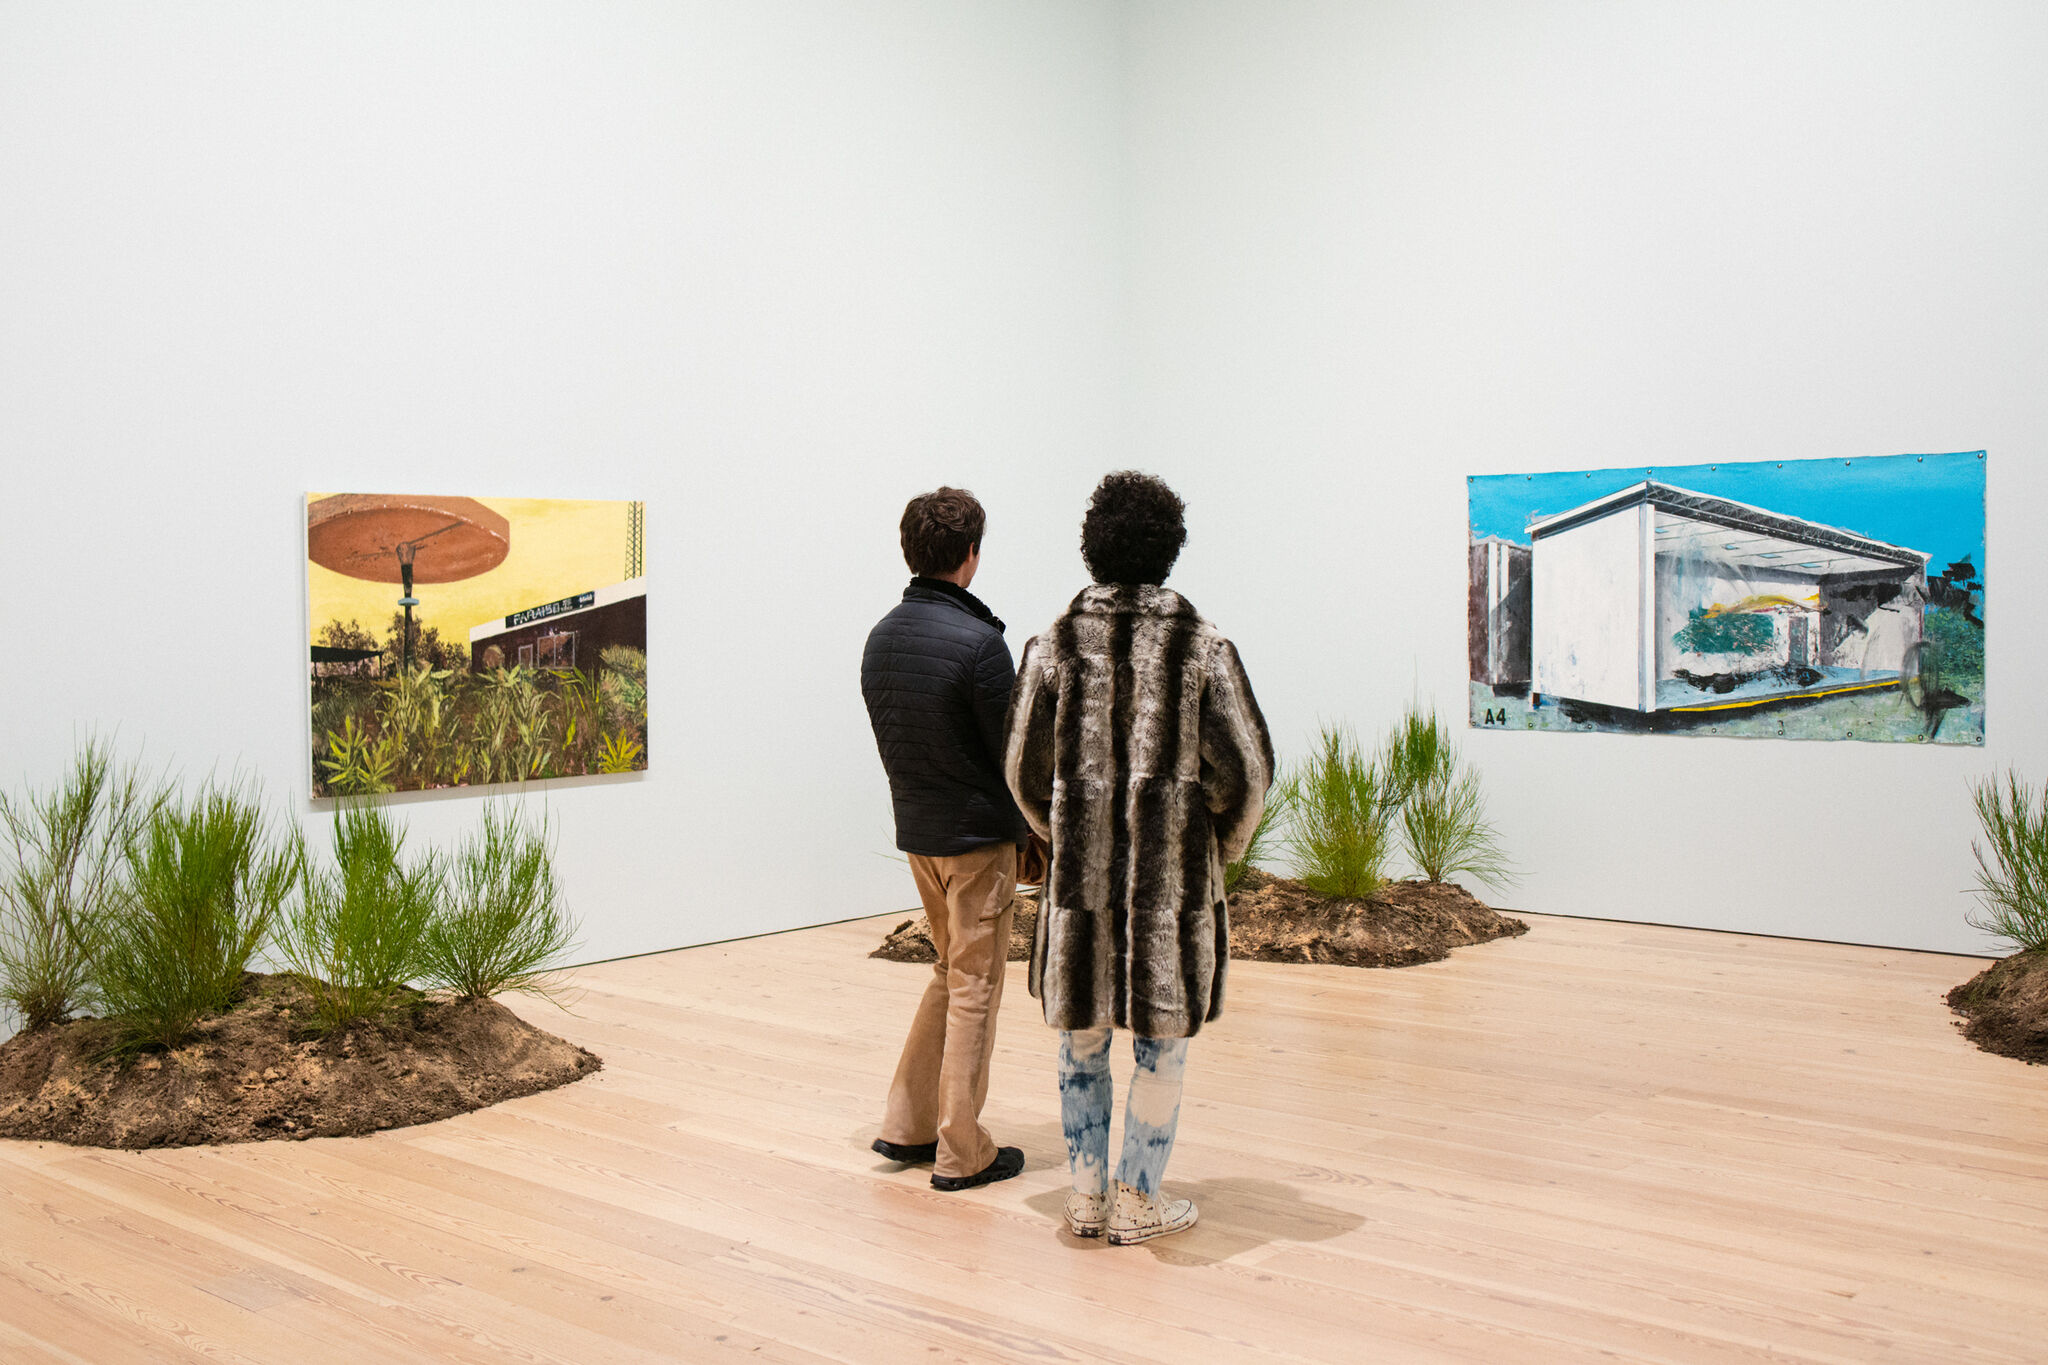 Two Whitney Museum guests–one wears a black jacket, the other wears a striped fur coat –stand in the middle of a gallery facing an installation by artist Rogelio Báez Vega depicting abandoned buildings in Puerto Rico. On the gallery’s wooden floors, there are small green shrubs growing out of mounds of dirt.